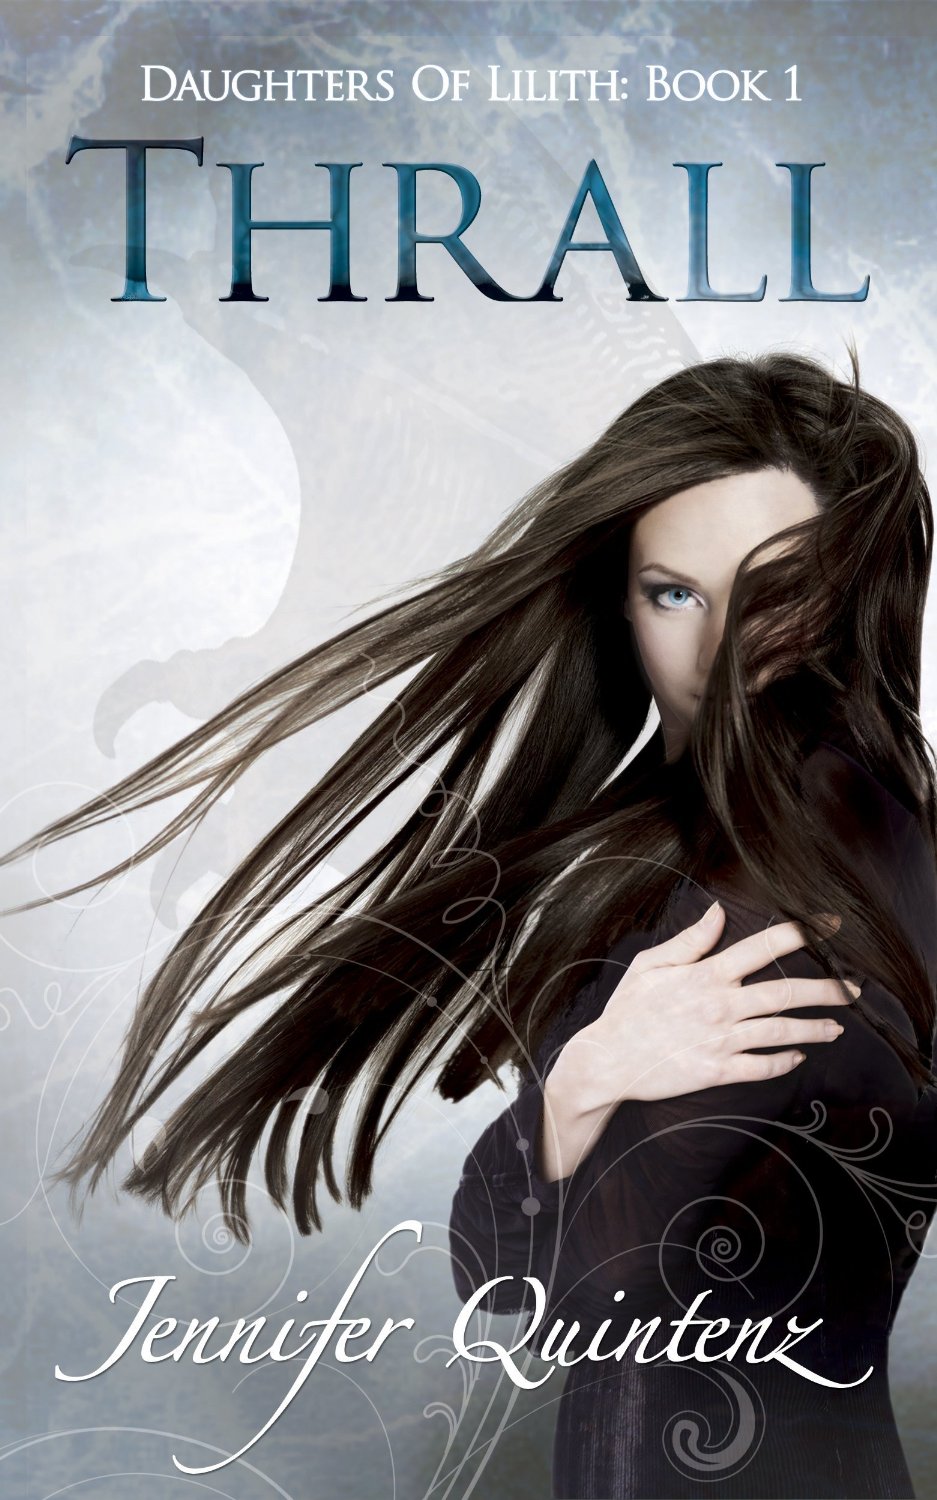 “Thrall” (Daughters of Lilith: Book 1) by Jennifer Quintenz